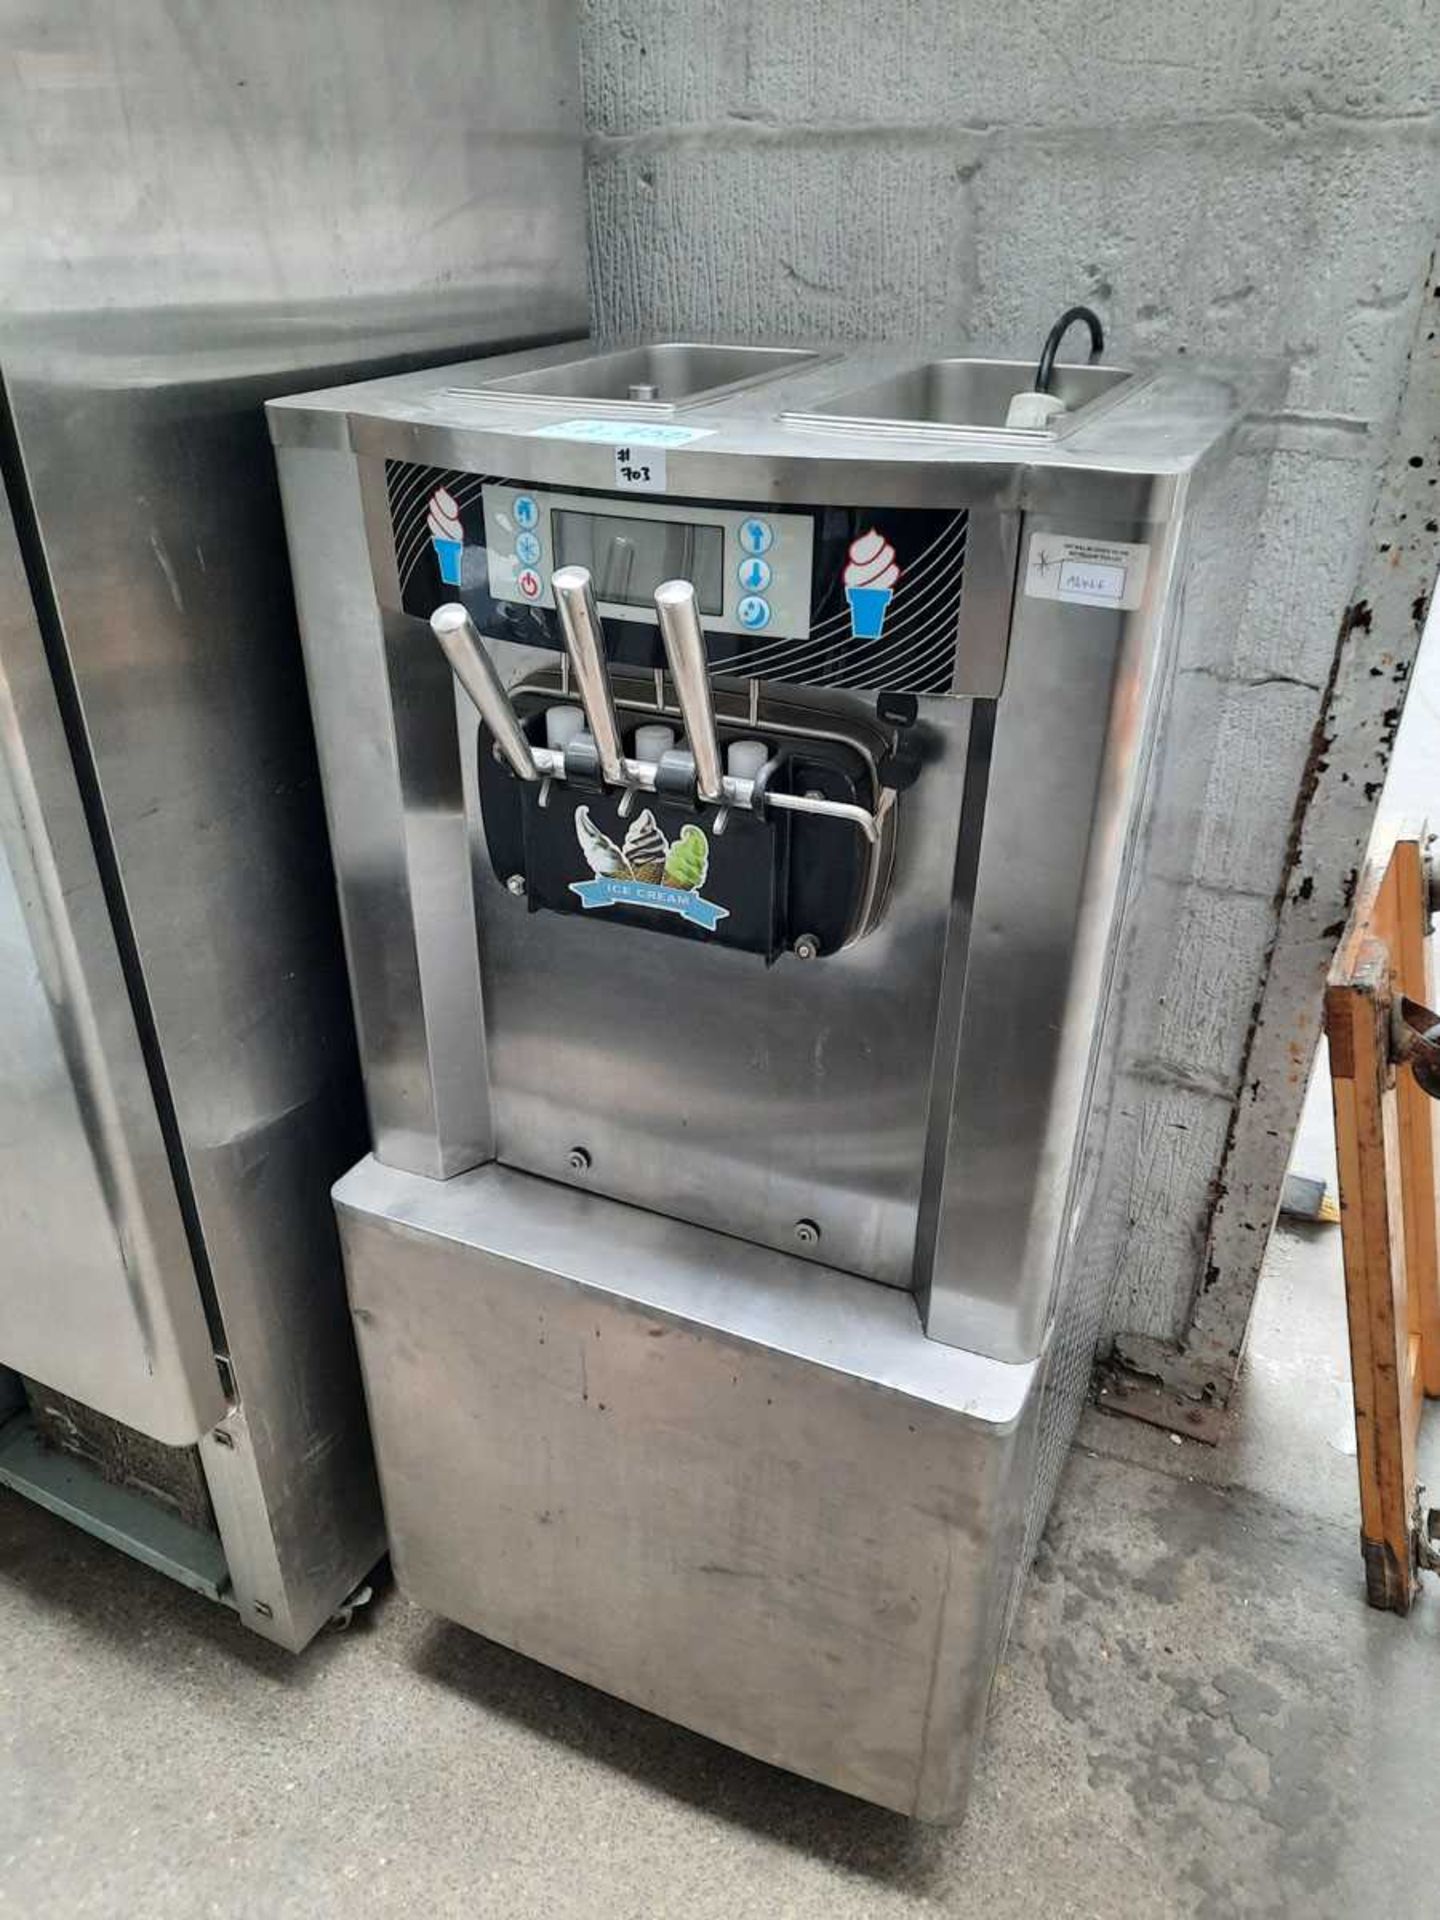 60cm ET638 soft serve ice cream machine with 3 dispensers and 2 hoppers